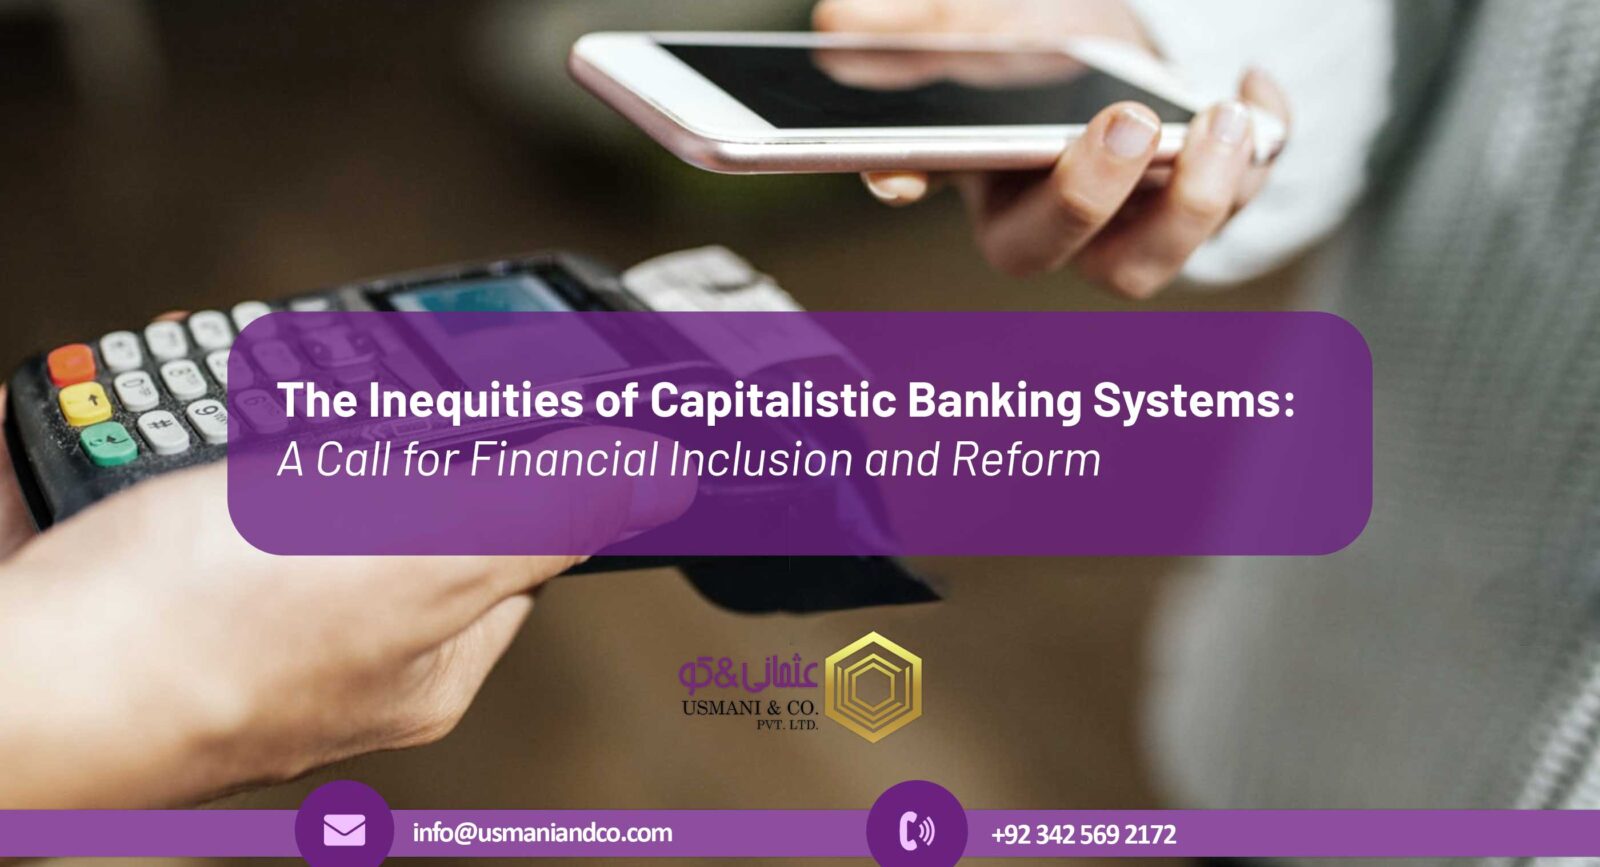 The Inequities of Capitalistic Banking Systems: A Call for Financial Inclusion and Reform